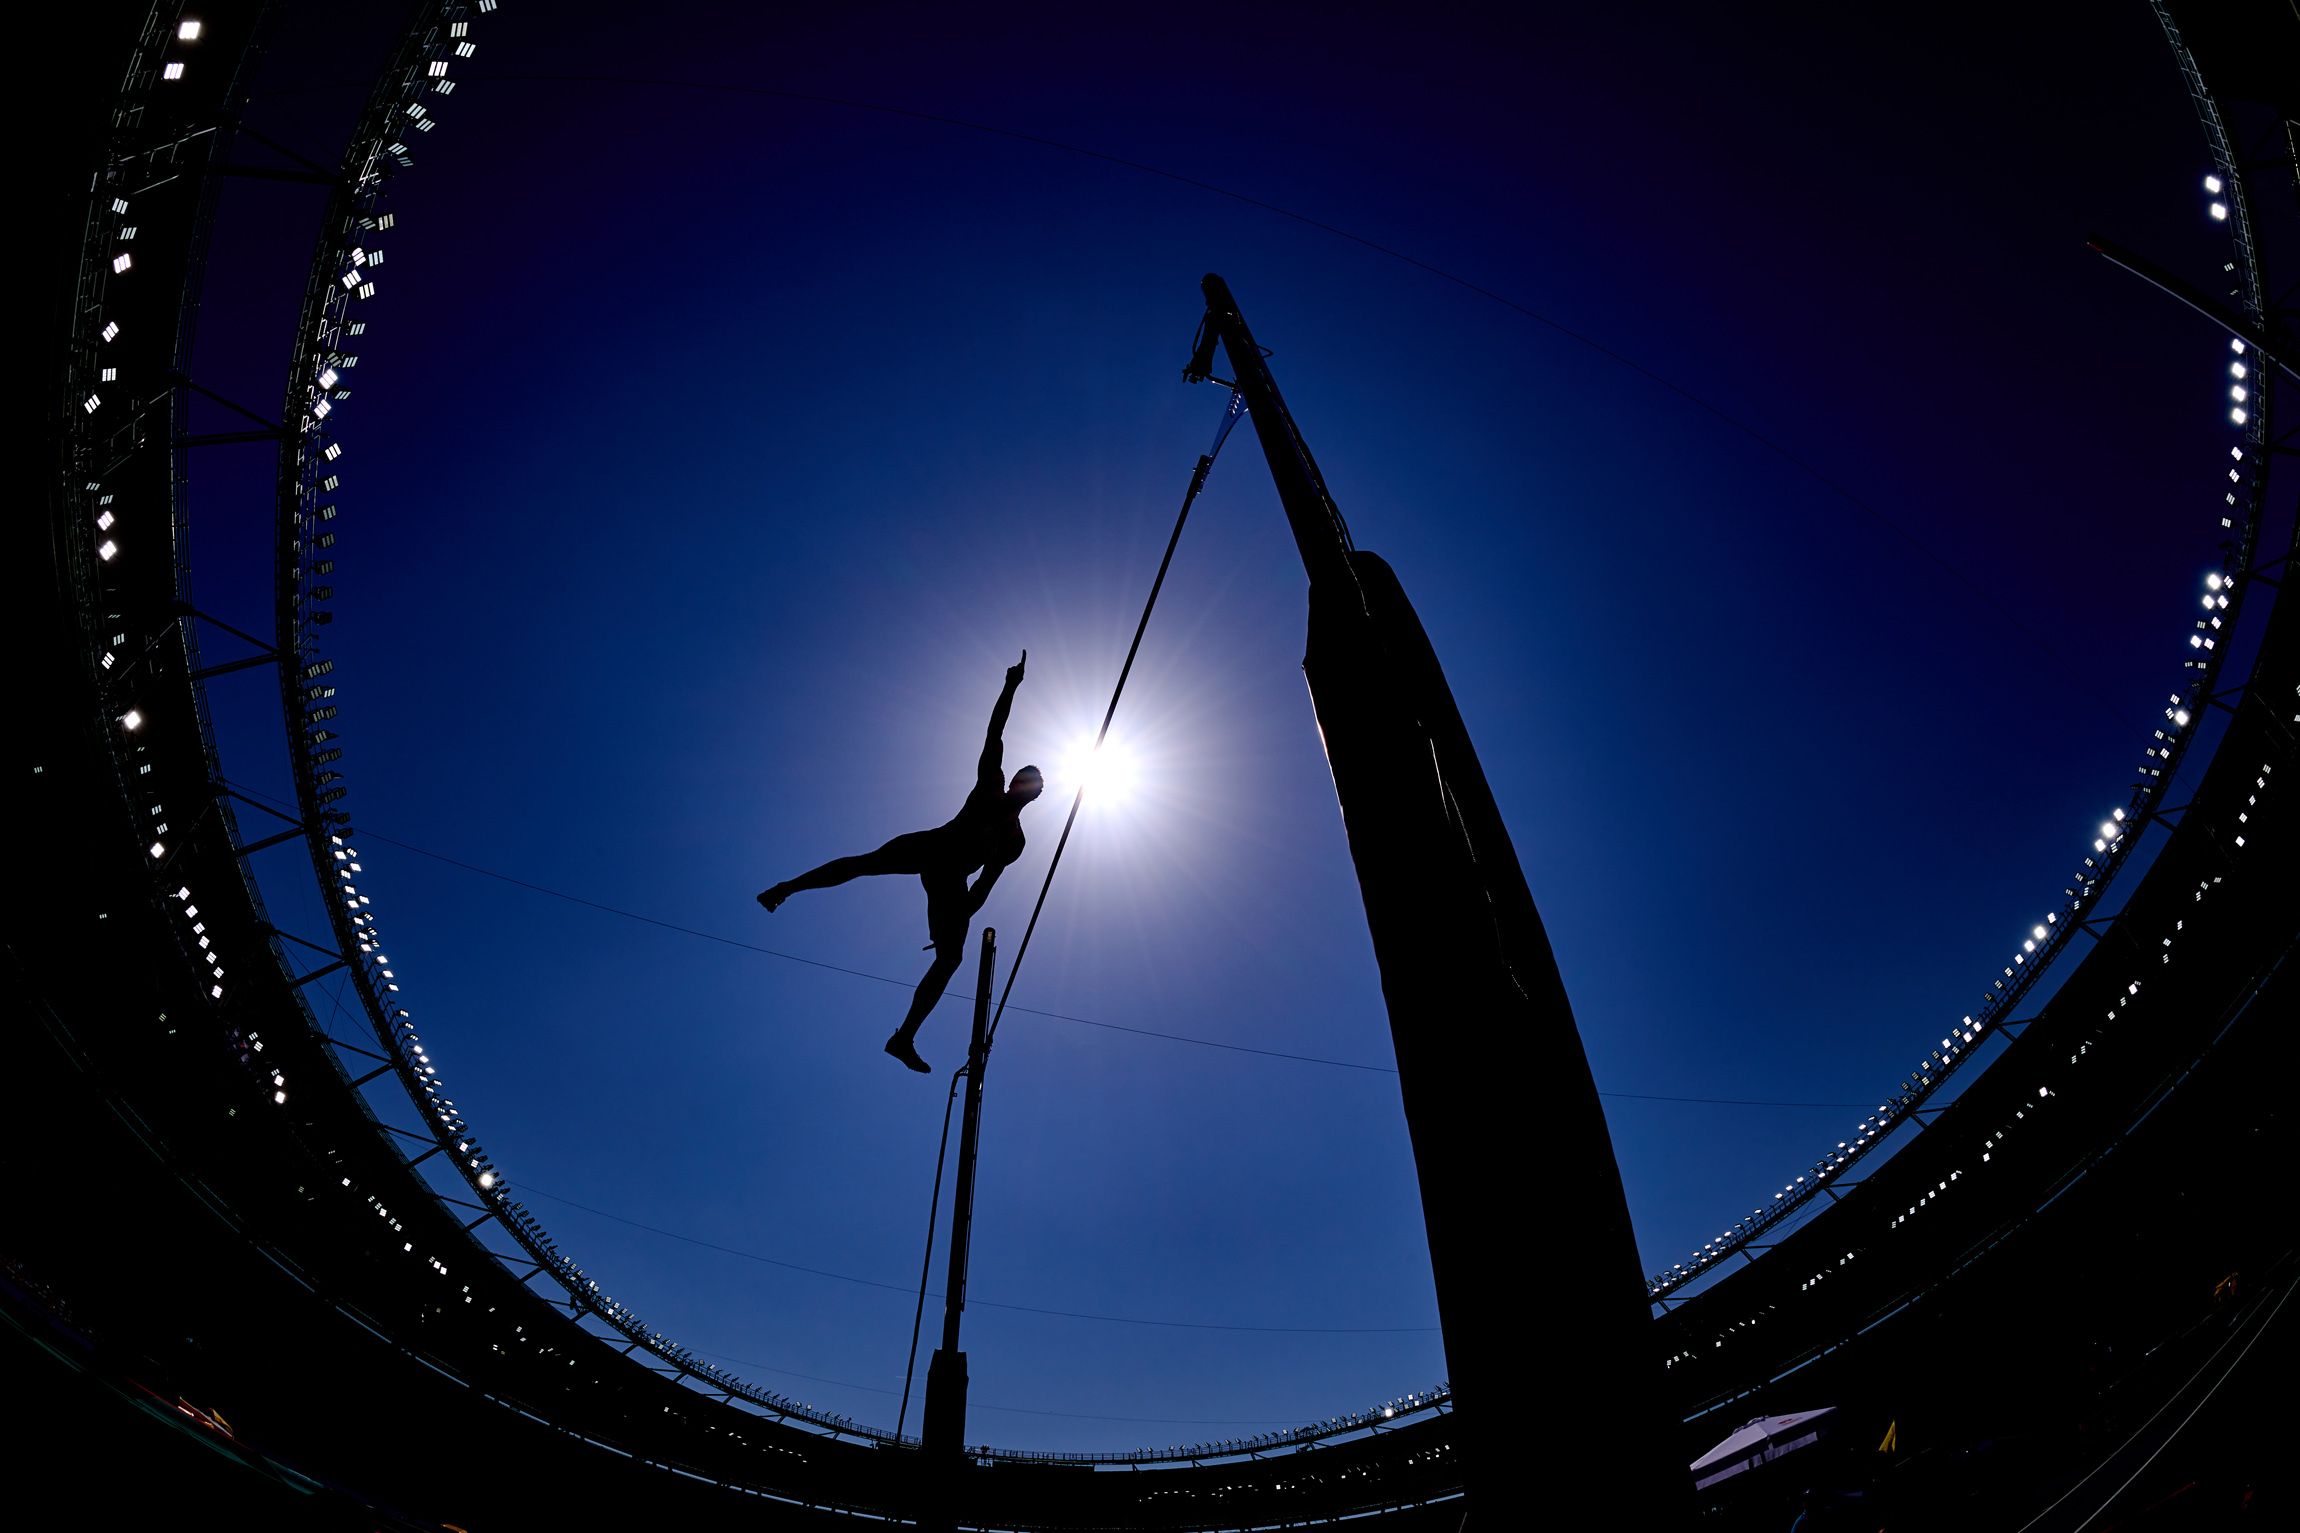 Photograph of the Year finalist - Leo Neugebauer in the decathlon pole vault in Budapest